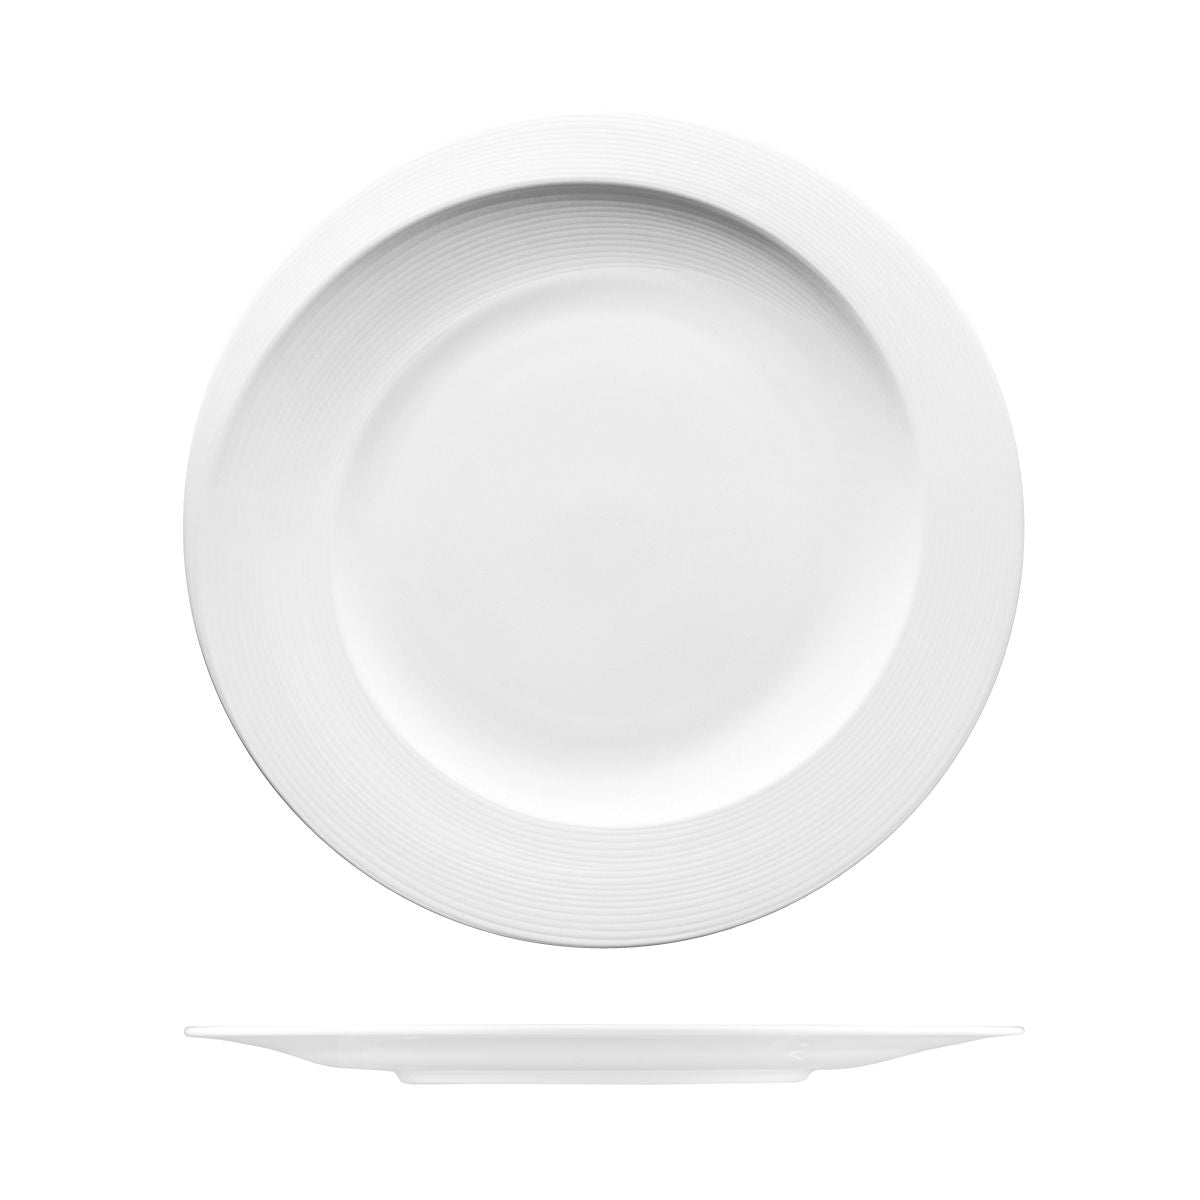 Plate - 230Mm, Spirale from Fortessa. made out of Bone China and sold in boxes of 24. Hospitality quality at wholesale price with The Flying Fork! 